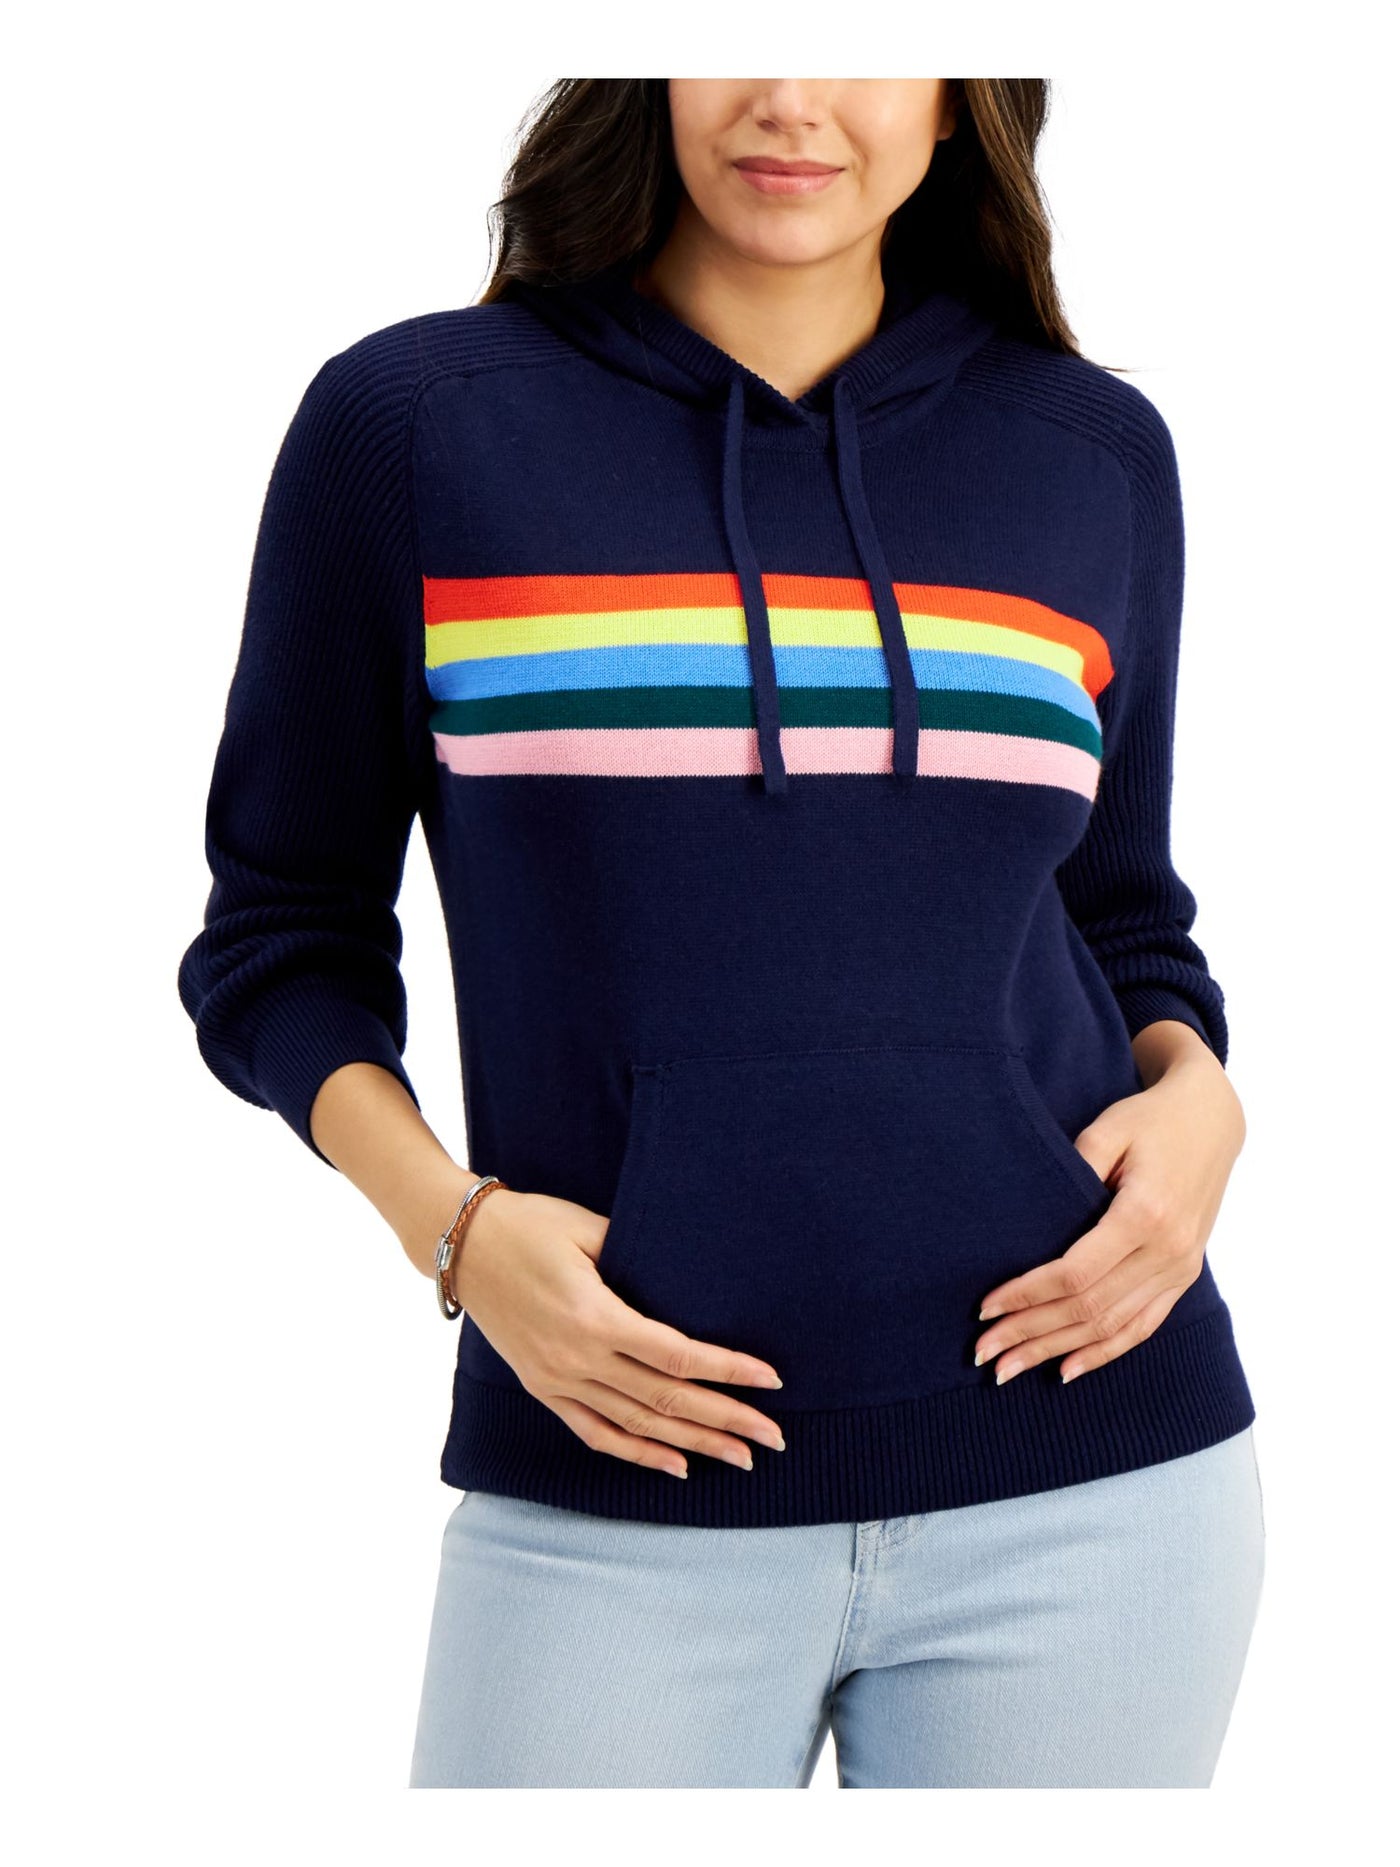 STYLE & COMPANY Womens Navy Striped Long Sleeve Hoodie Sweater Petites PM